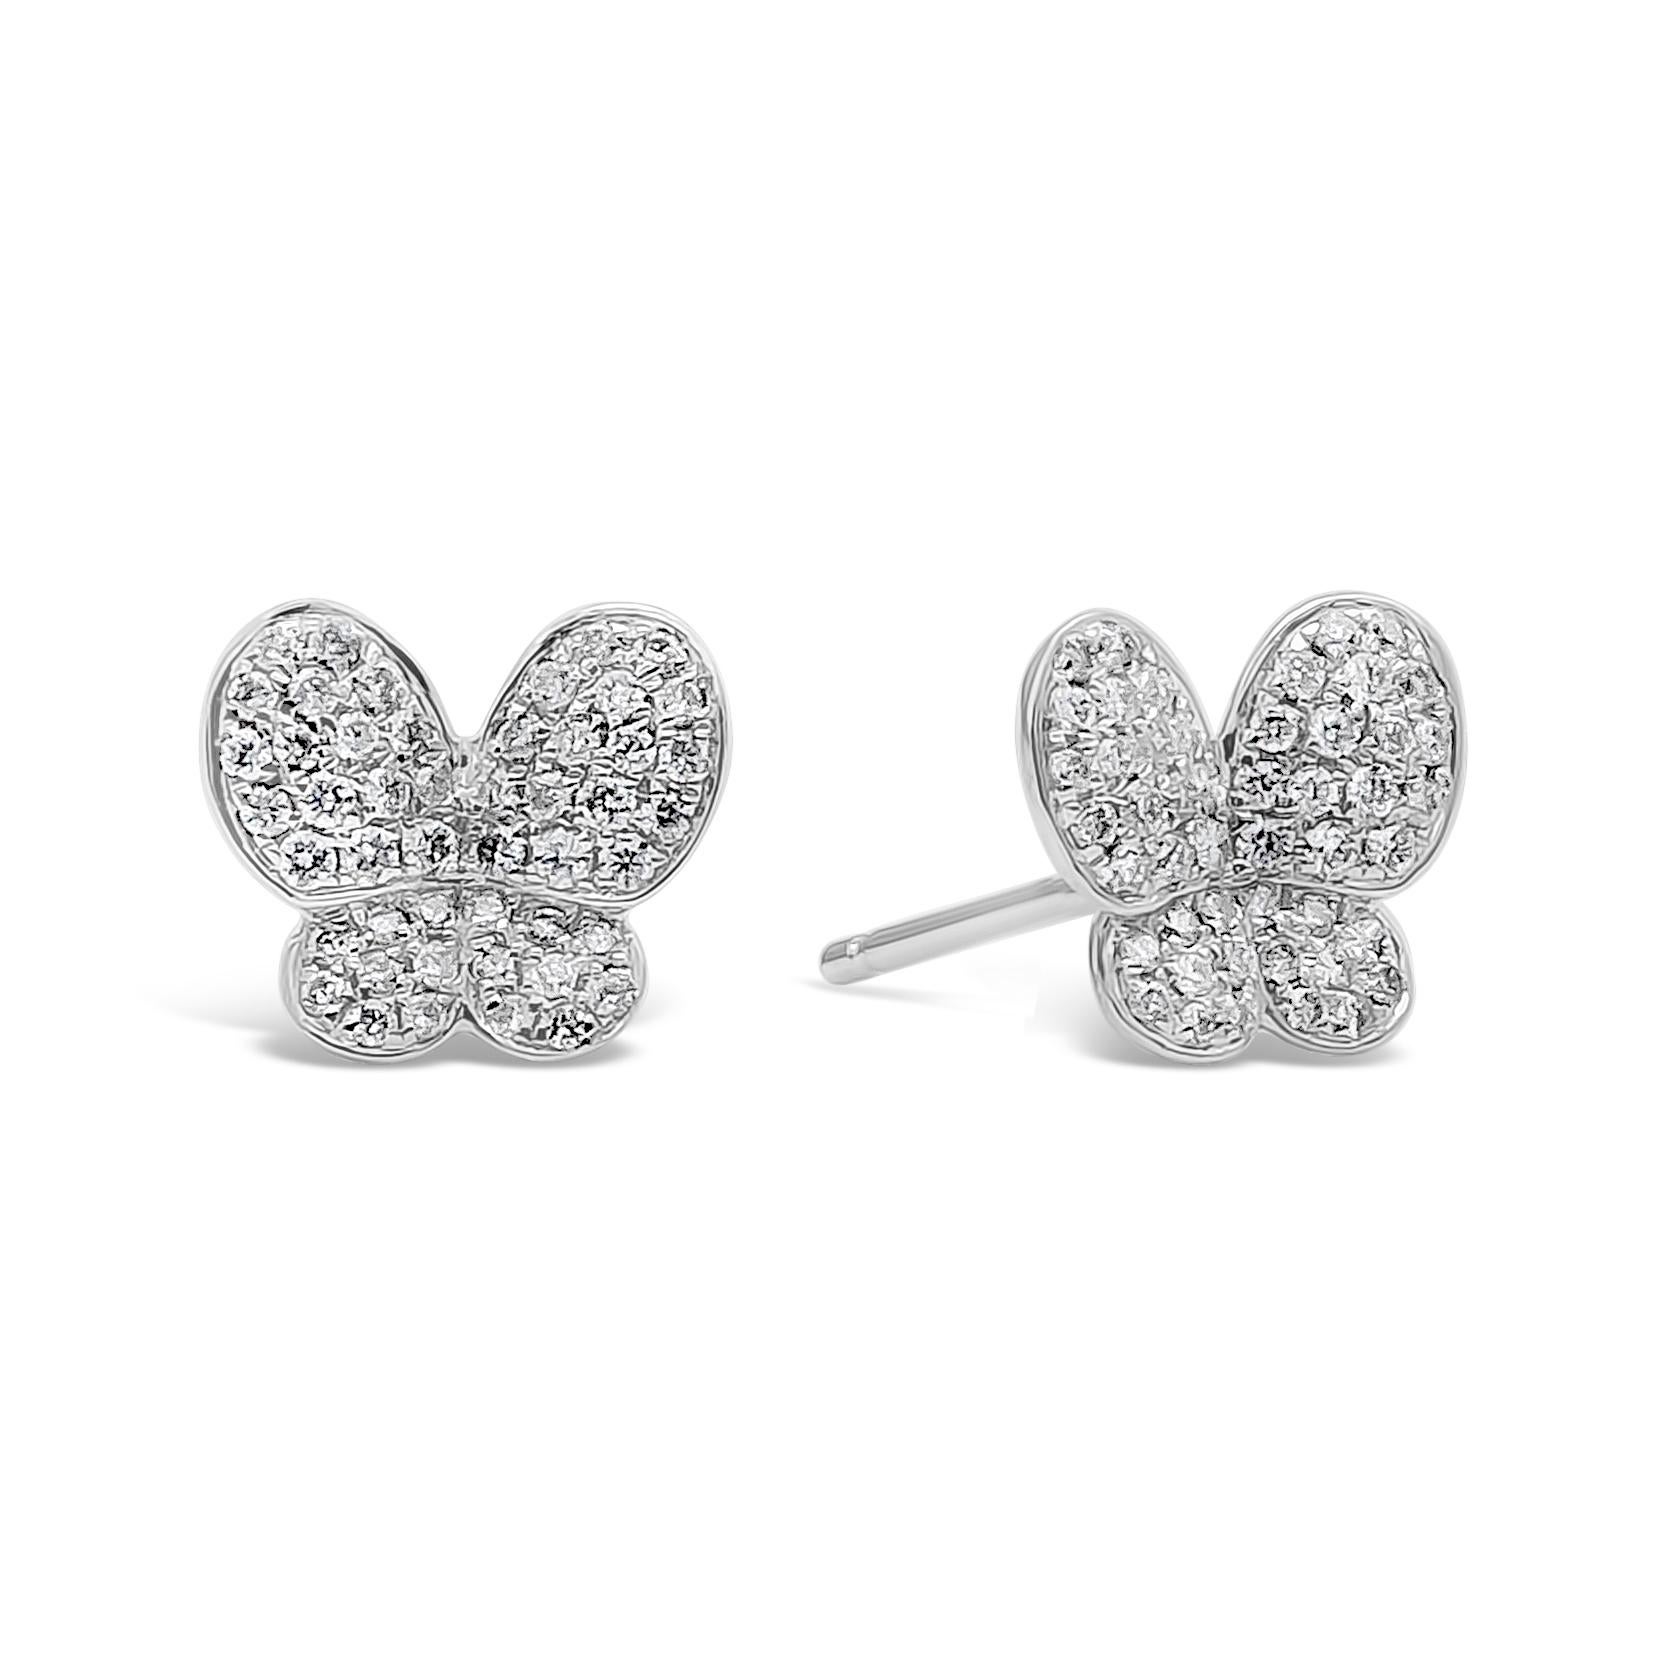 A unique and simple pair of stud earrings, featuring a cluster of 96 round brilliant cut diamonds, micro-pavé set in a butterfly motif setting made of 18K white gold. Diamonds weigh 0.30 carats total with F color and VS-SI clarity. A perfect